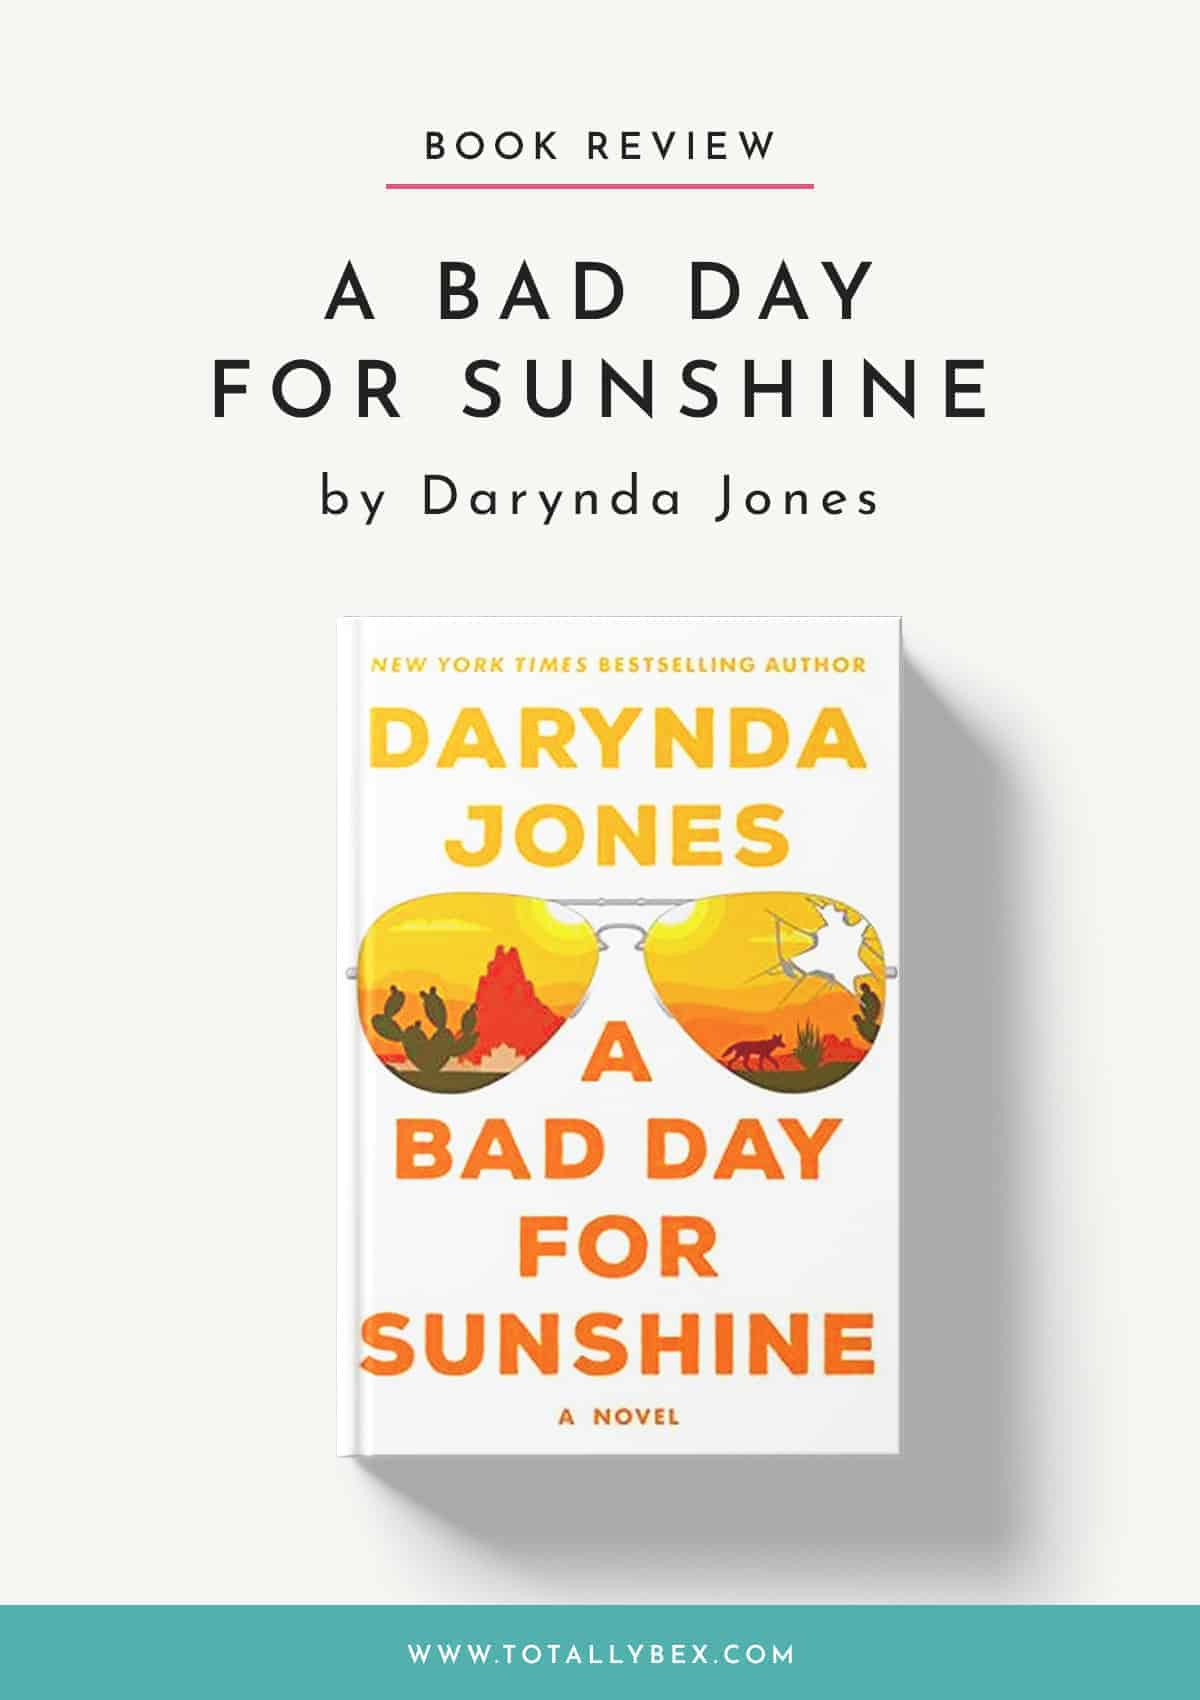 A Bad Day for Sunshine by Darynda Jones-Book Review